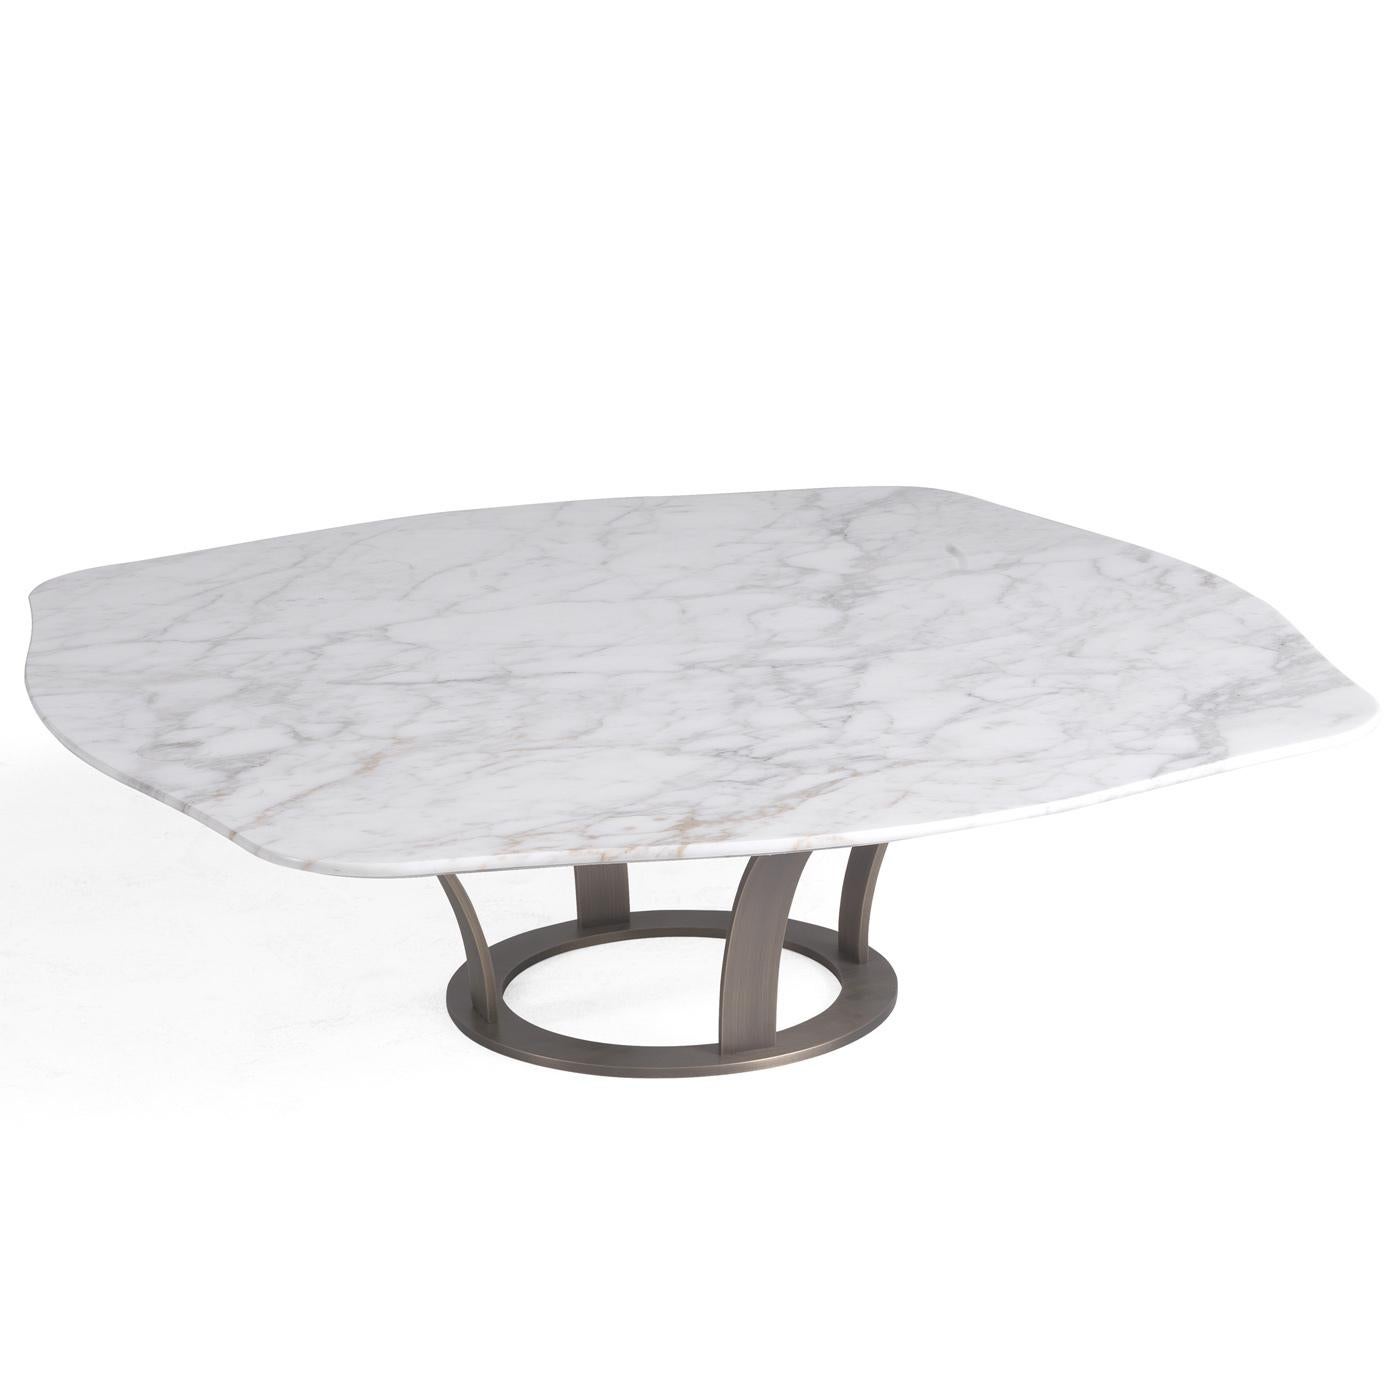 A simple design enhanced by refined materials, this coffee table boasts a splendid top in Calacatta gold marble, showcasing natural veins and elegant shades. The supporting structure is composed of four curved legs resting on a circular base in